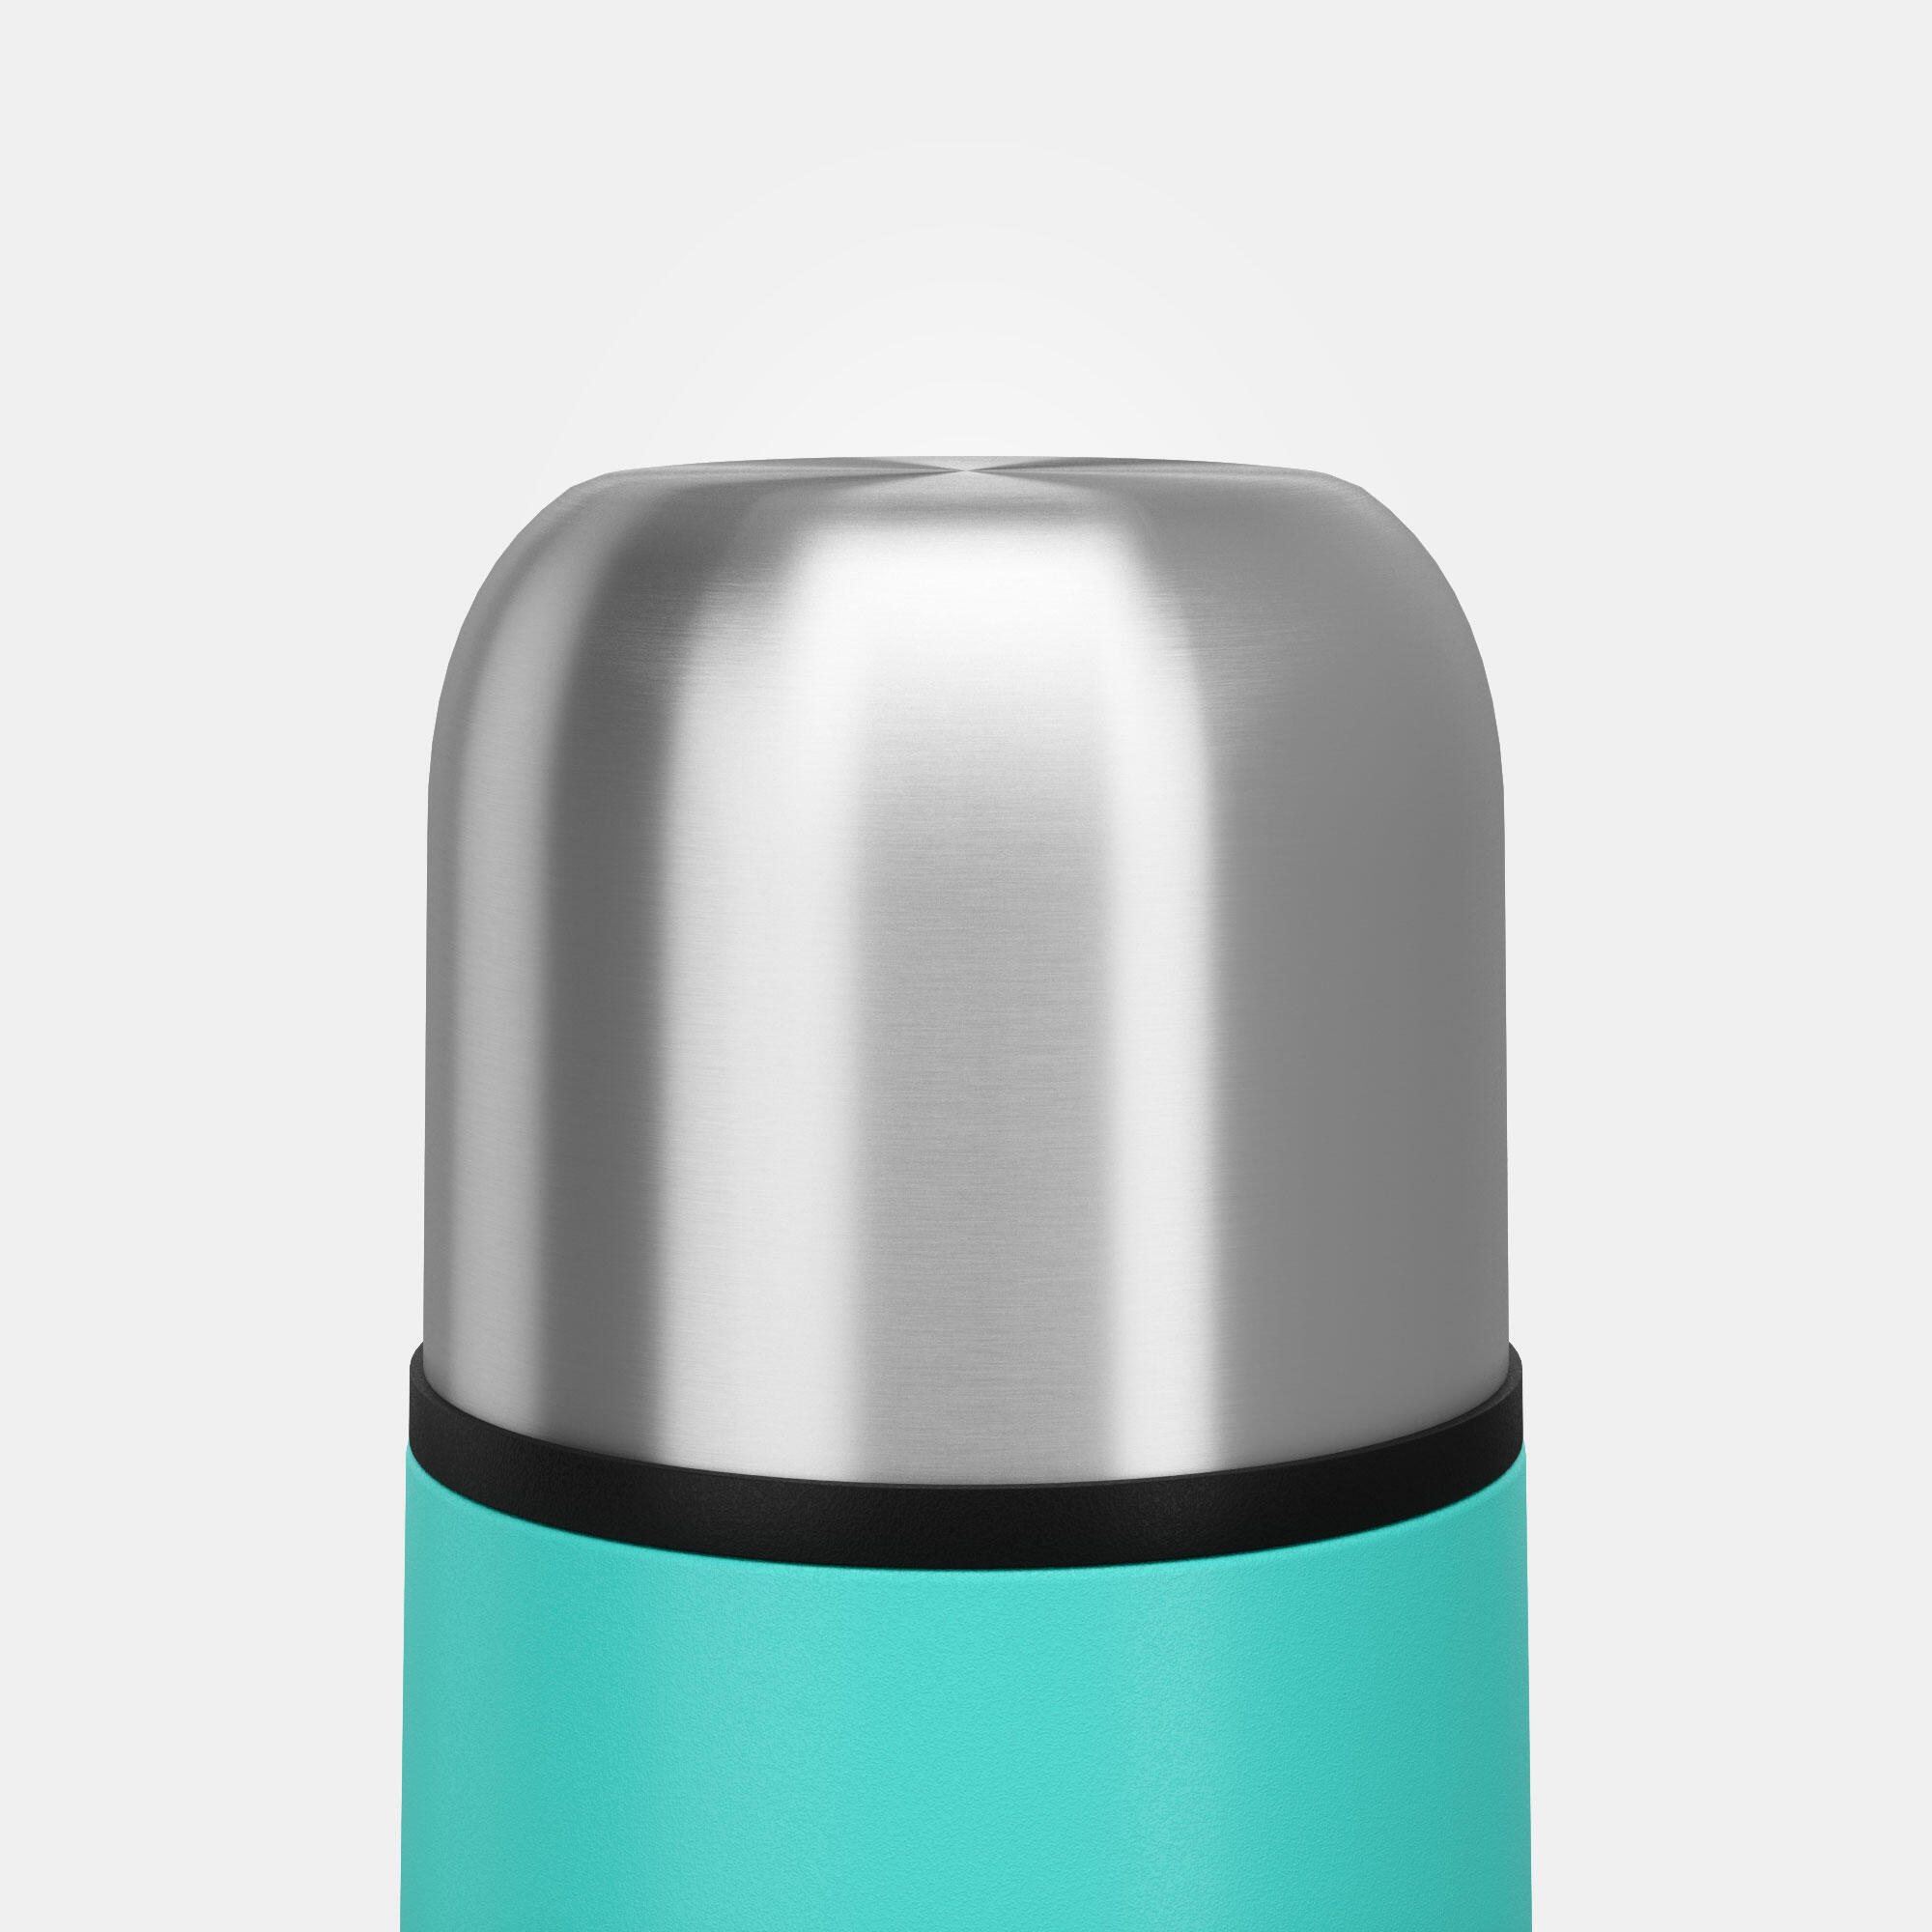 0.4 L stainless steel isothermal flask with cup for hiking - turquoise 4/10